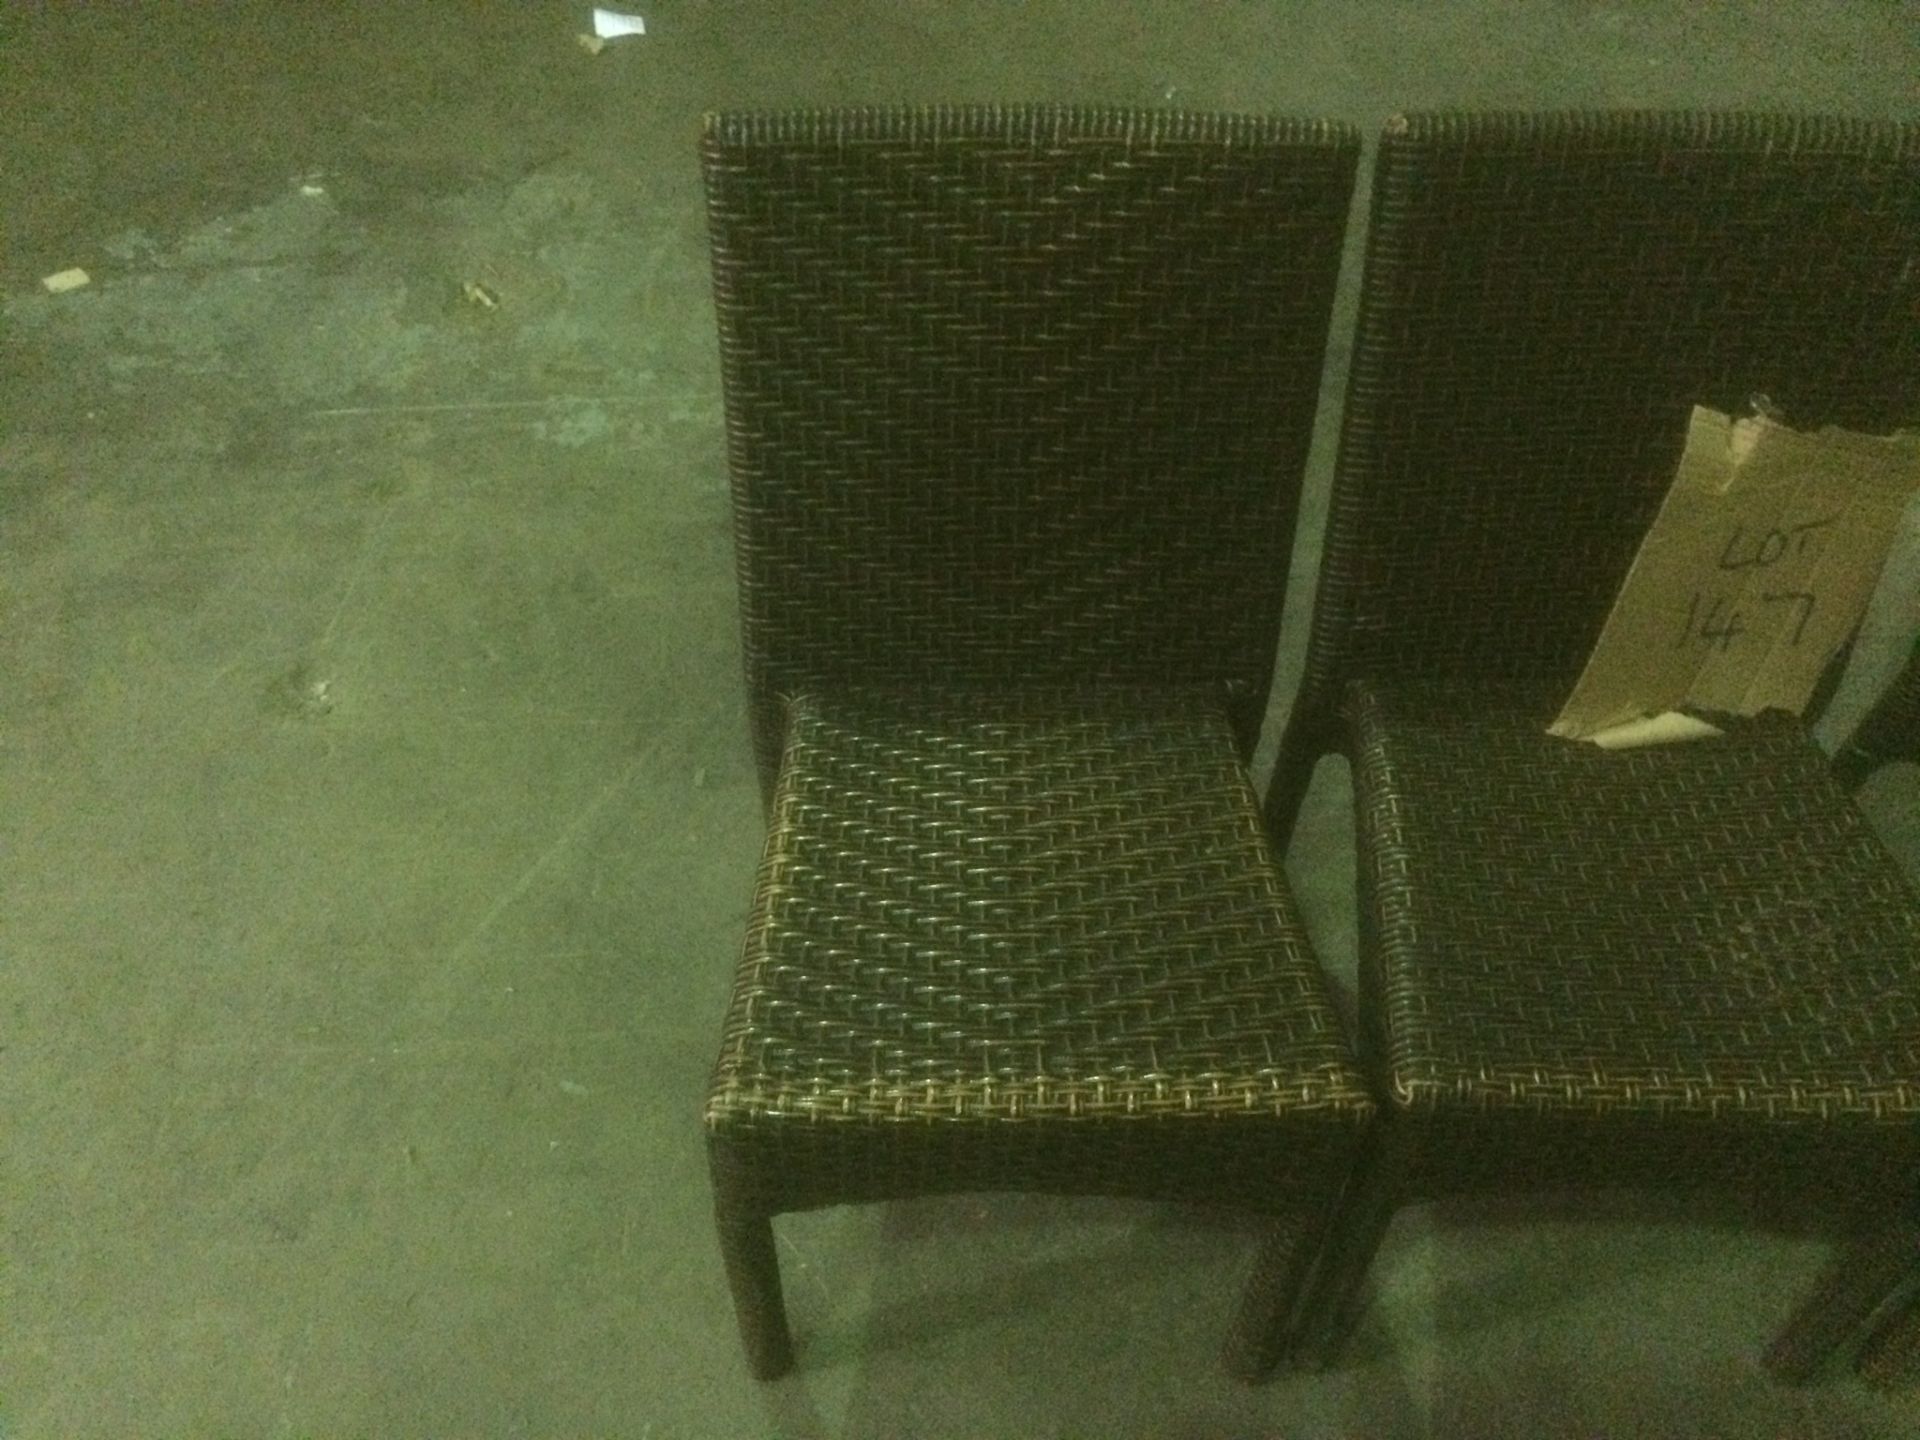 4 x brown woven cane garden chairs - Image 2 of 3